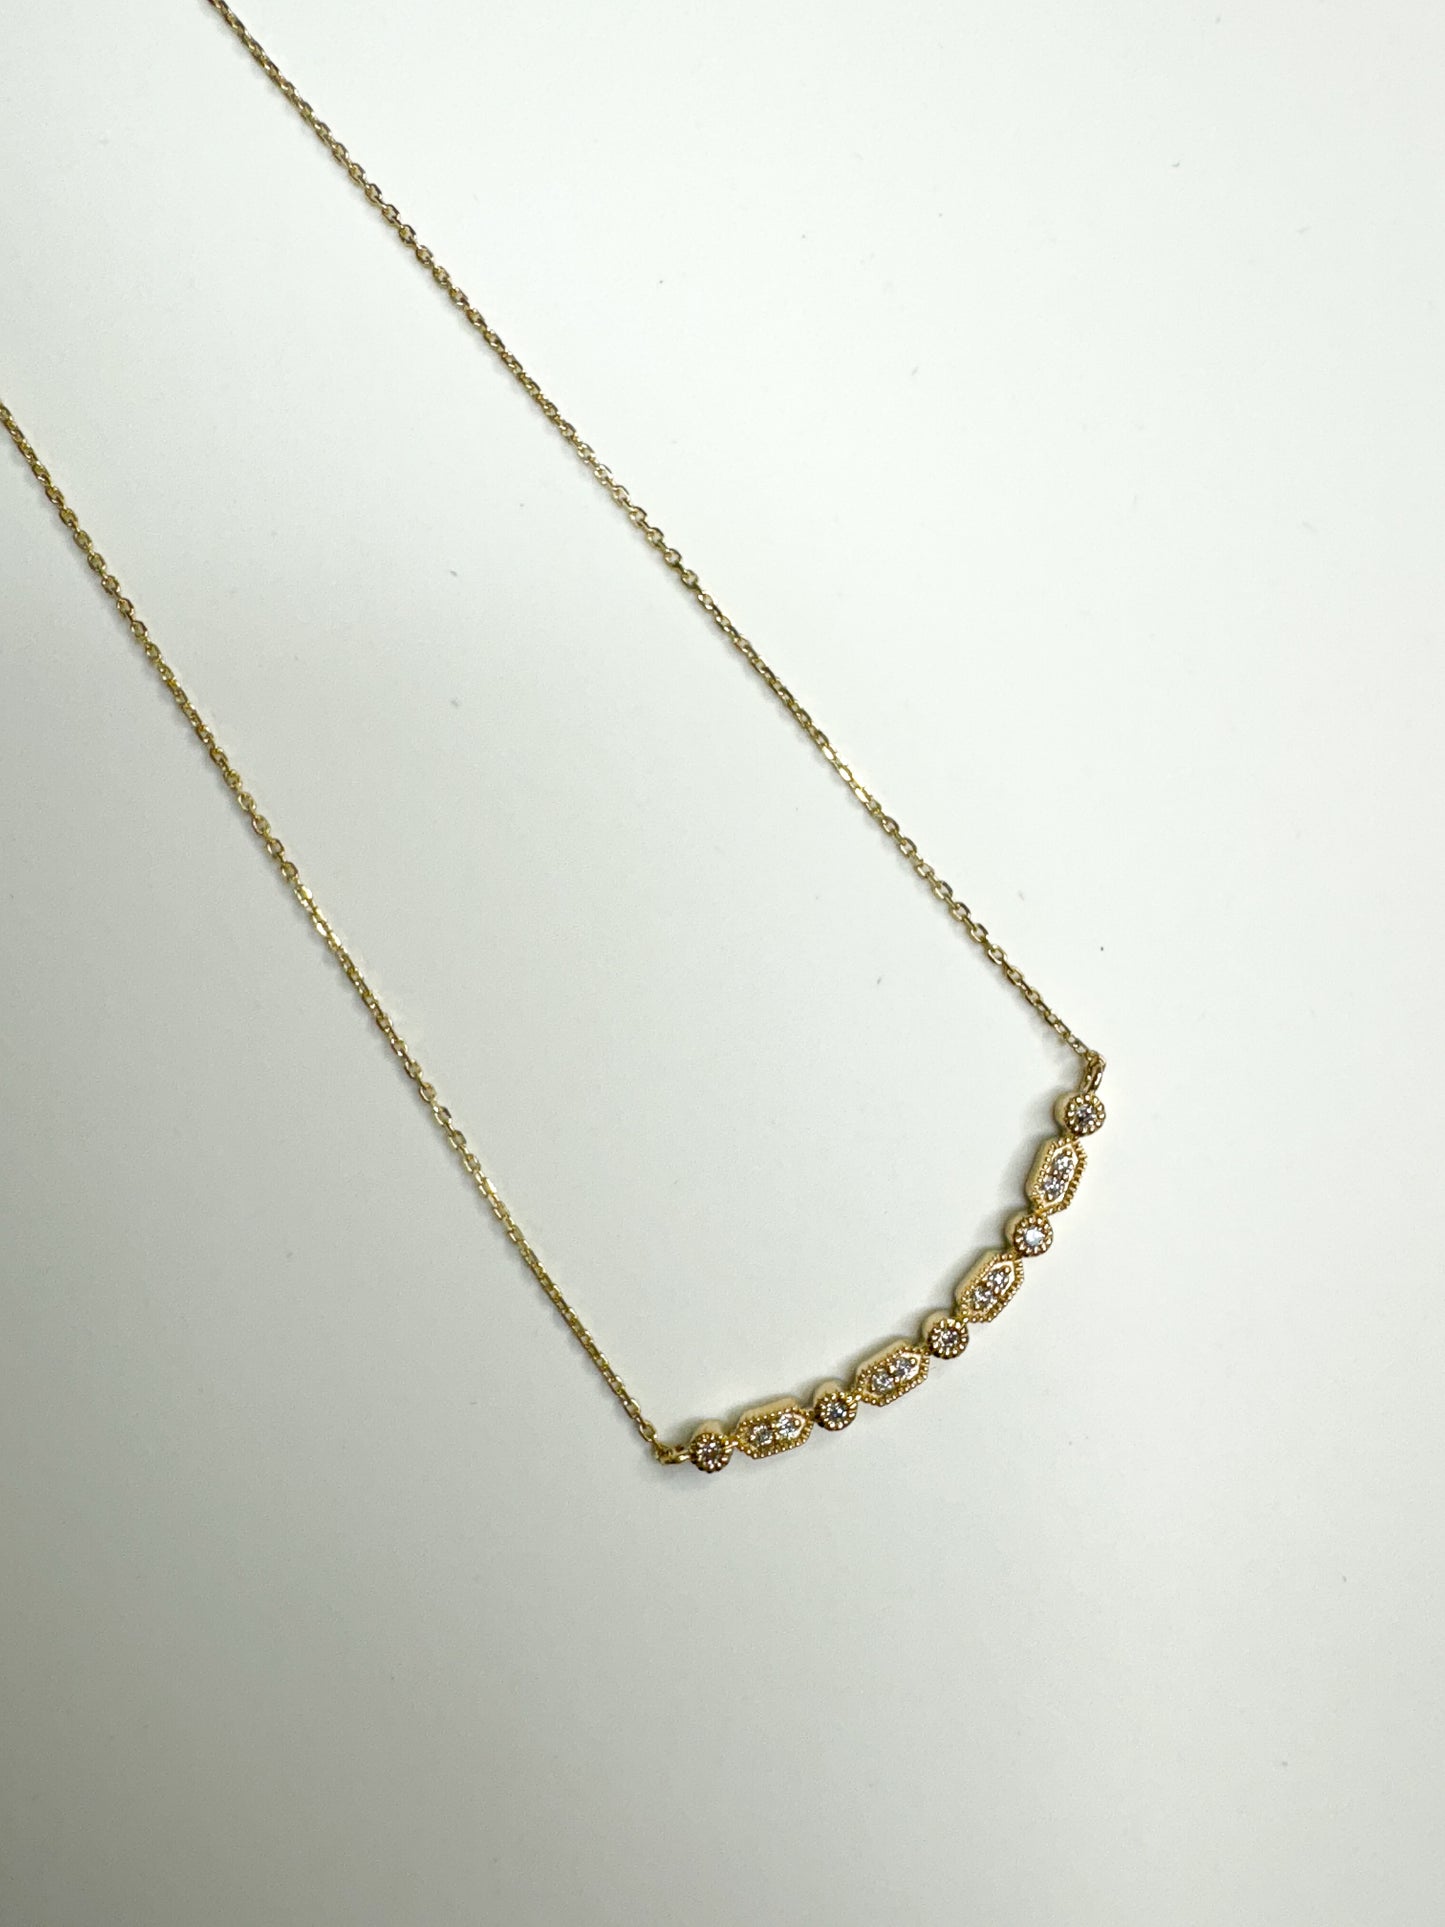 New Vintage Inspired 14k Yellow Gold and diamond necklace